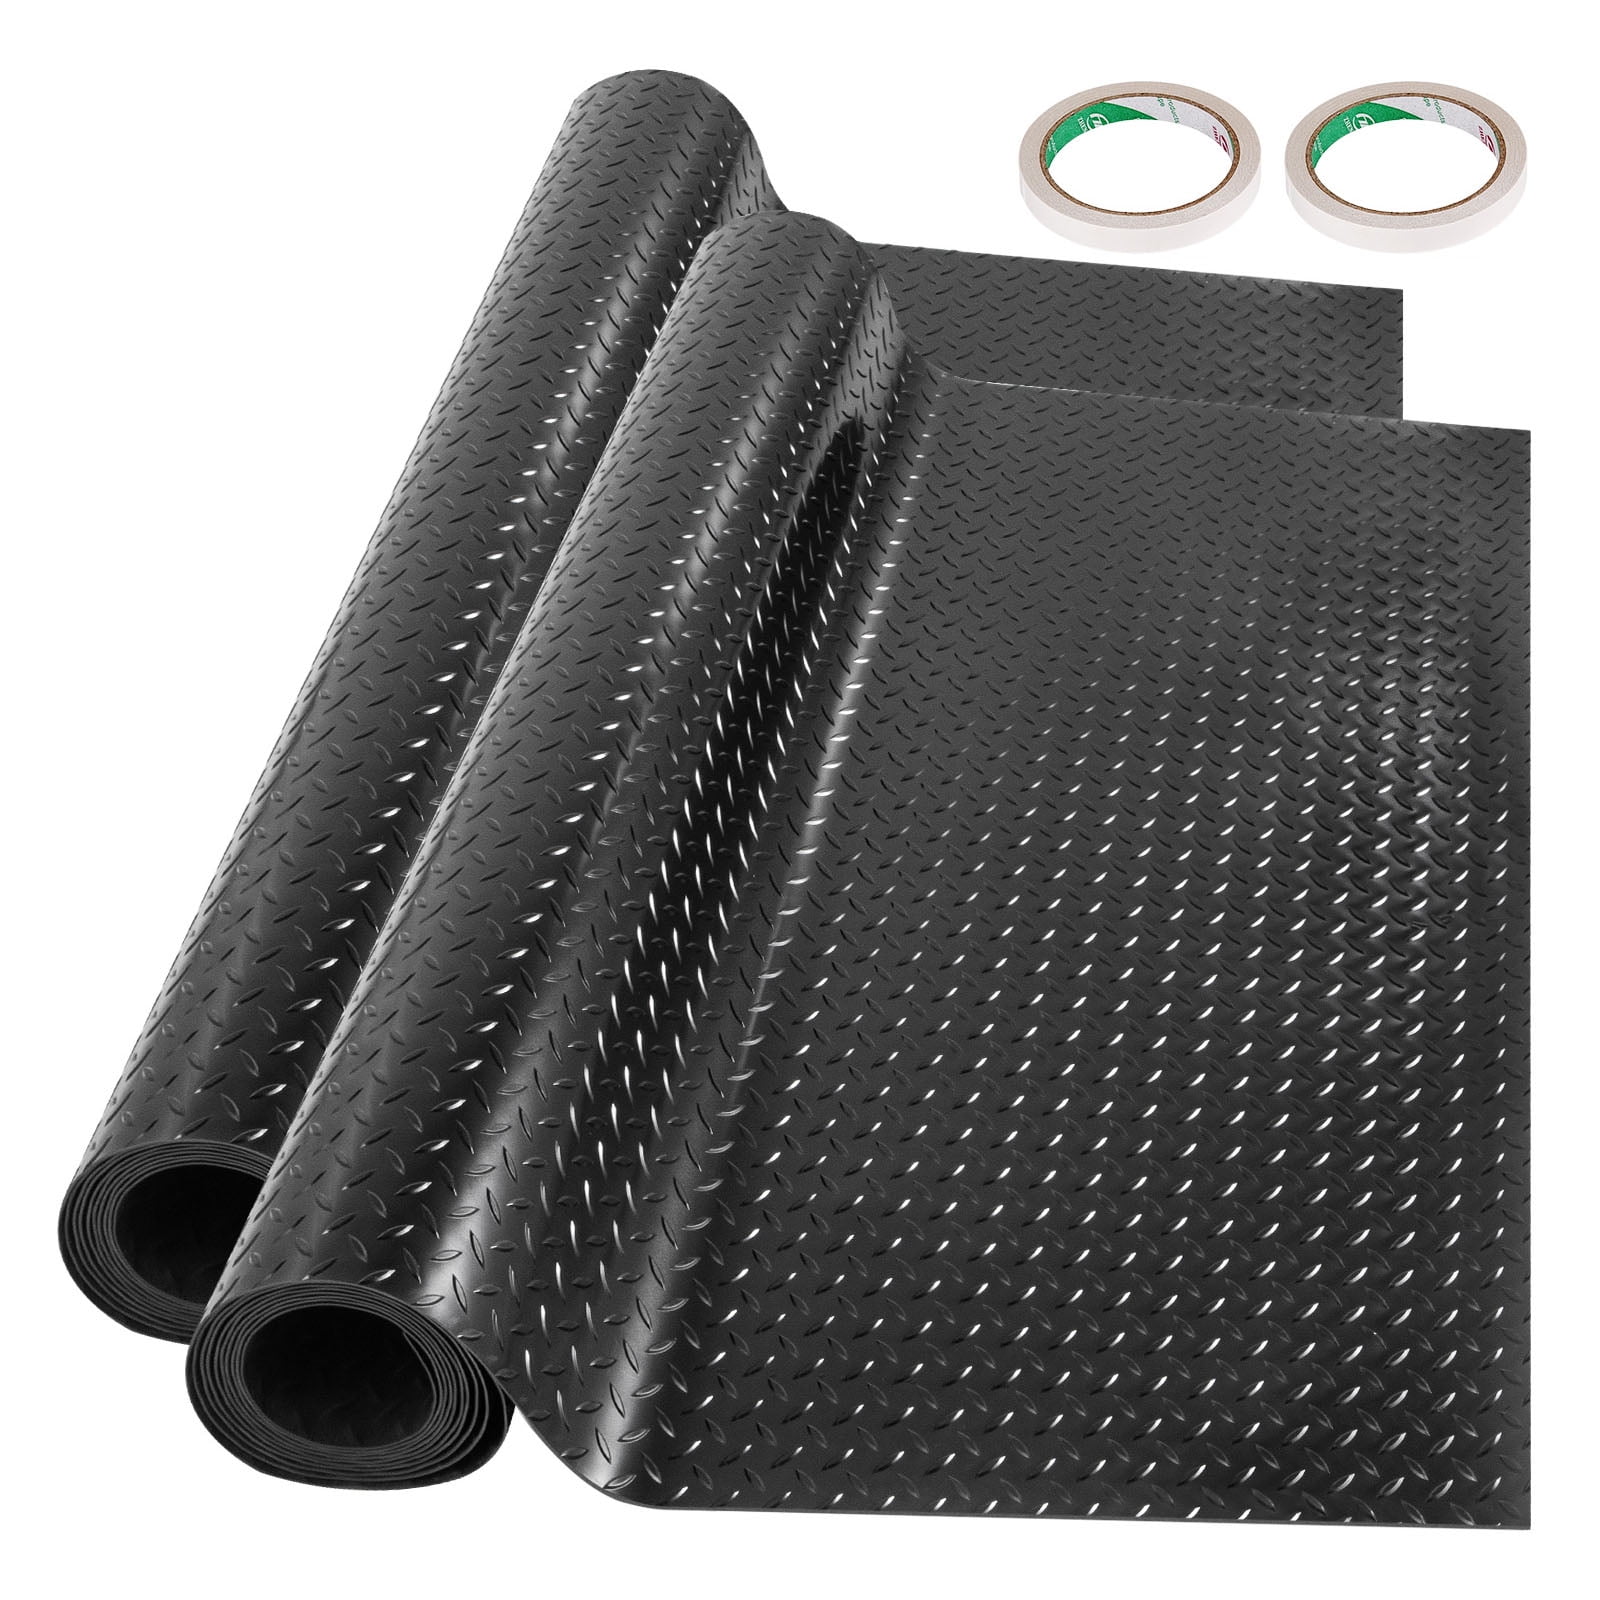 Wide Ribbed Rubber Sheeting Garage Flooring Matting Rolls 3 MM & 5 MM THICK 